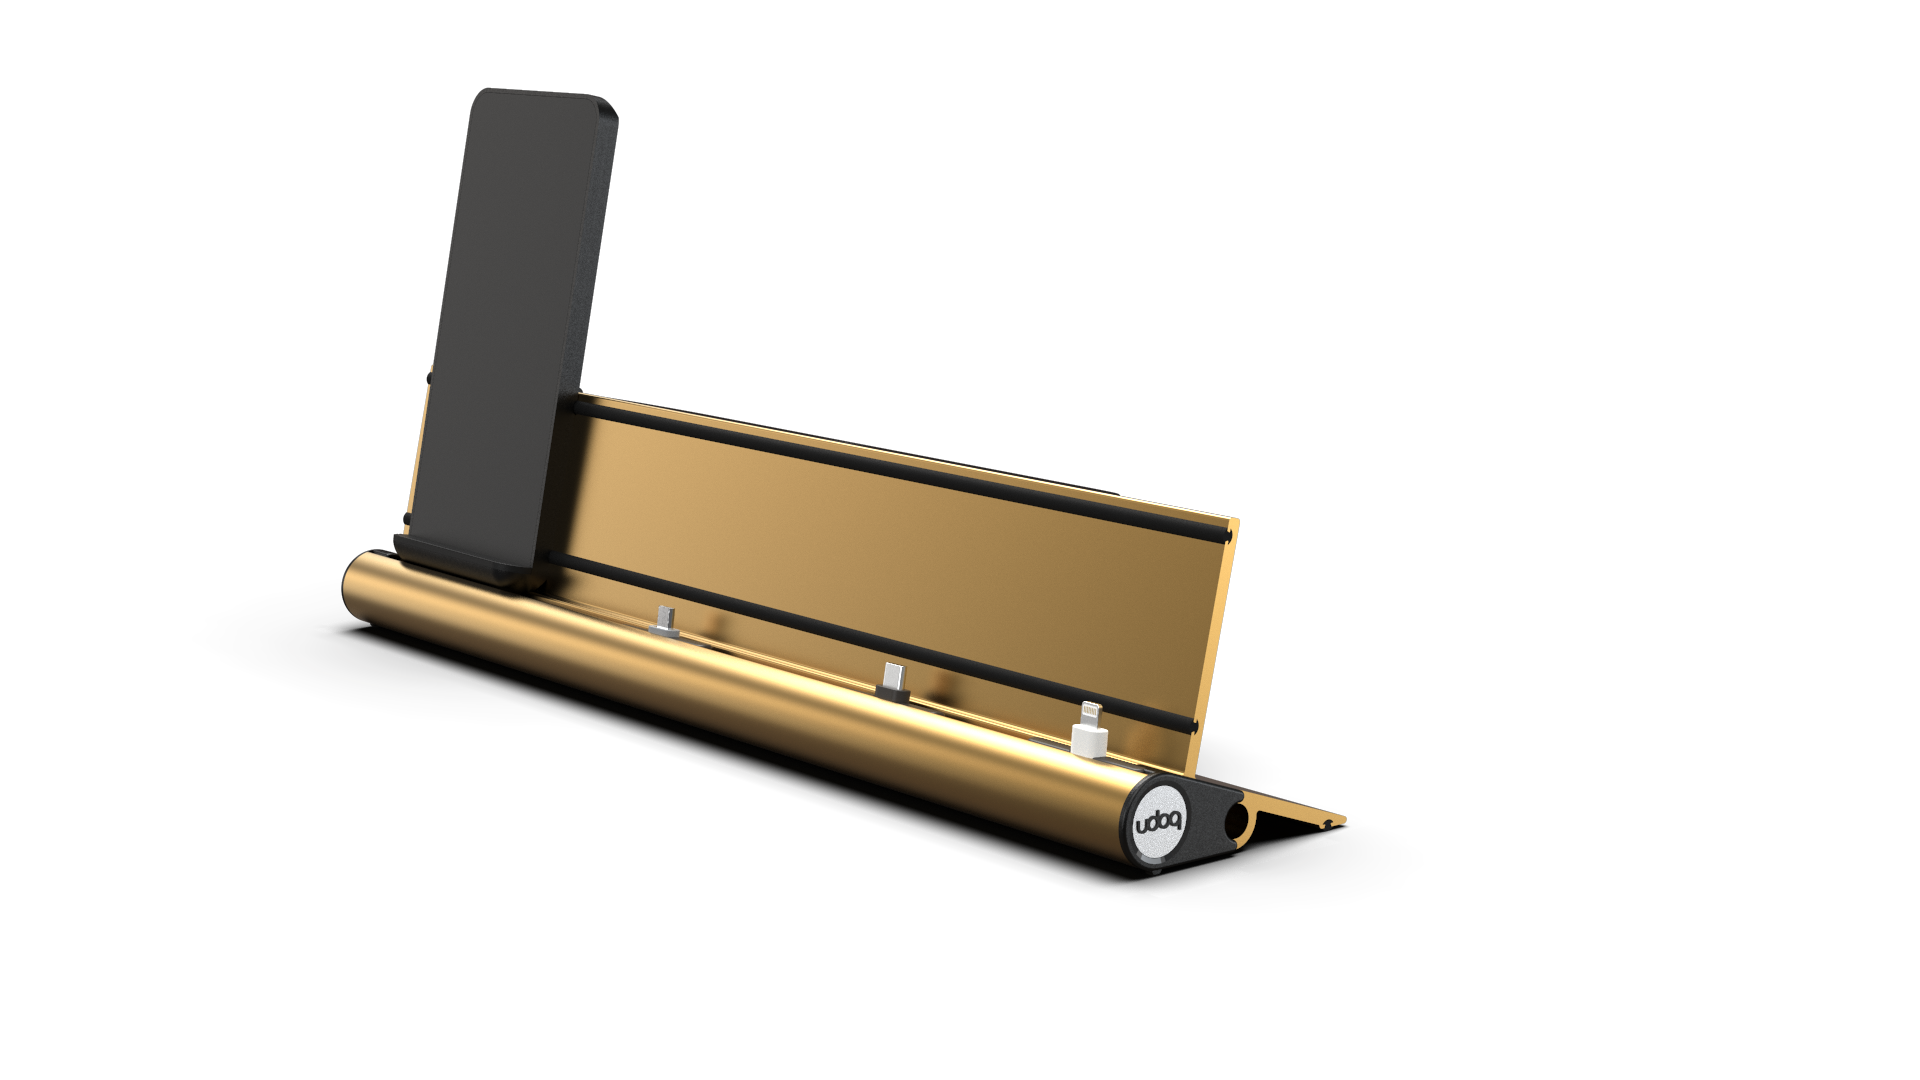 400 multi charging station in gold with wireless adapter and Lightning